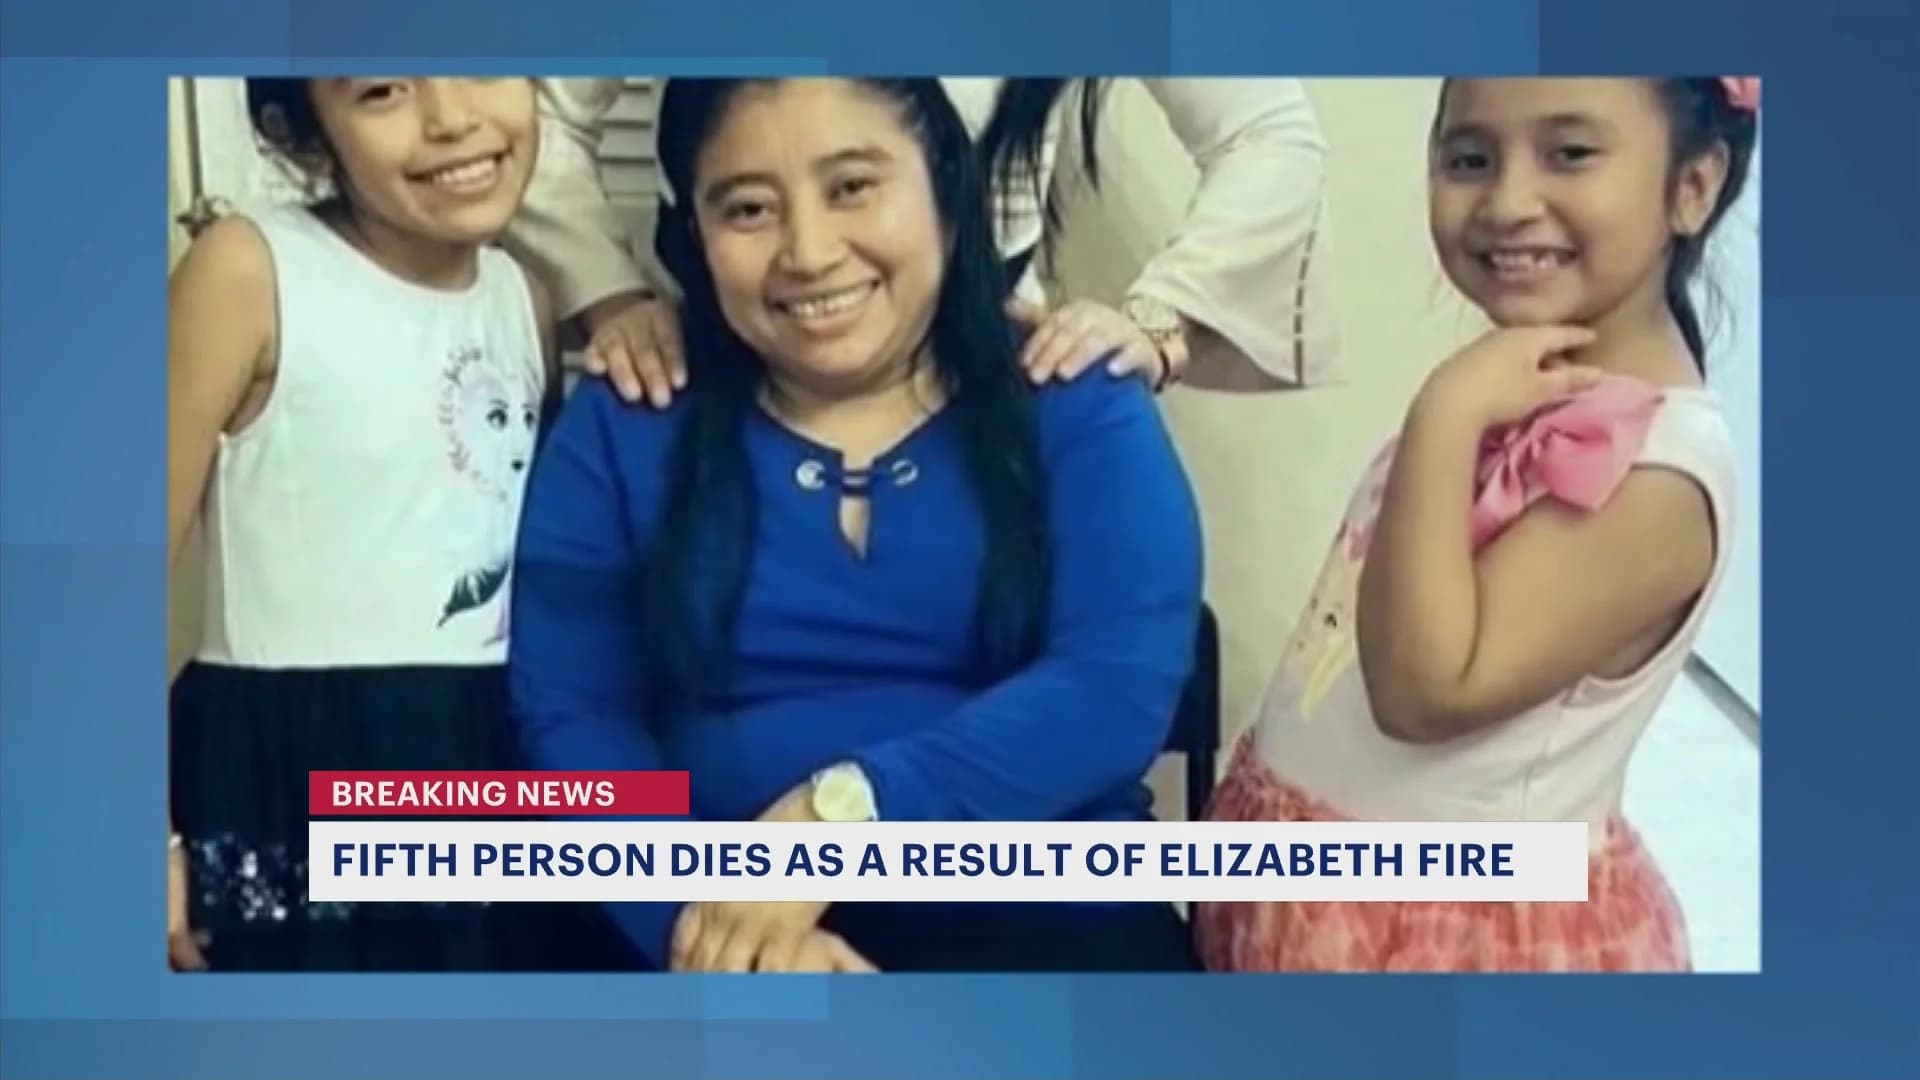 Spokeswoman: Mother of 2 girls killed in Elizabeth fire dies from injuries